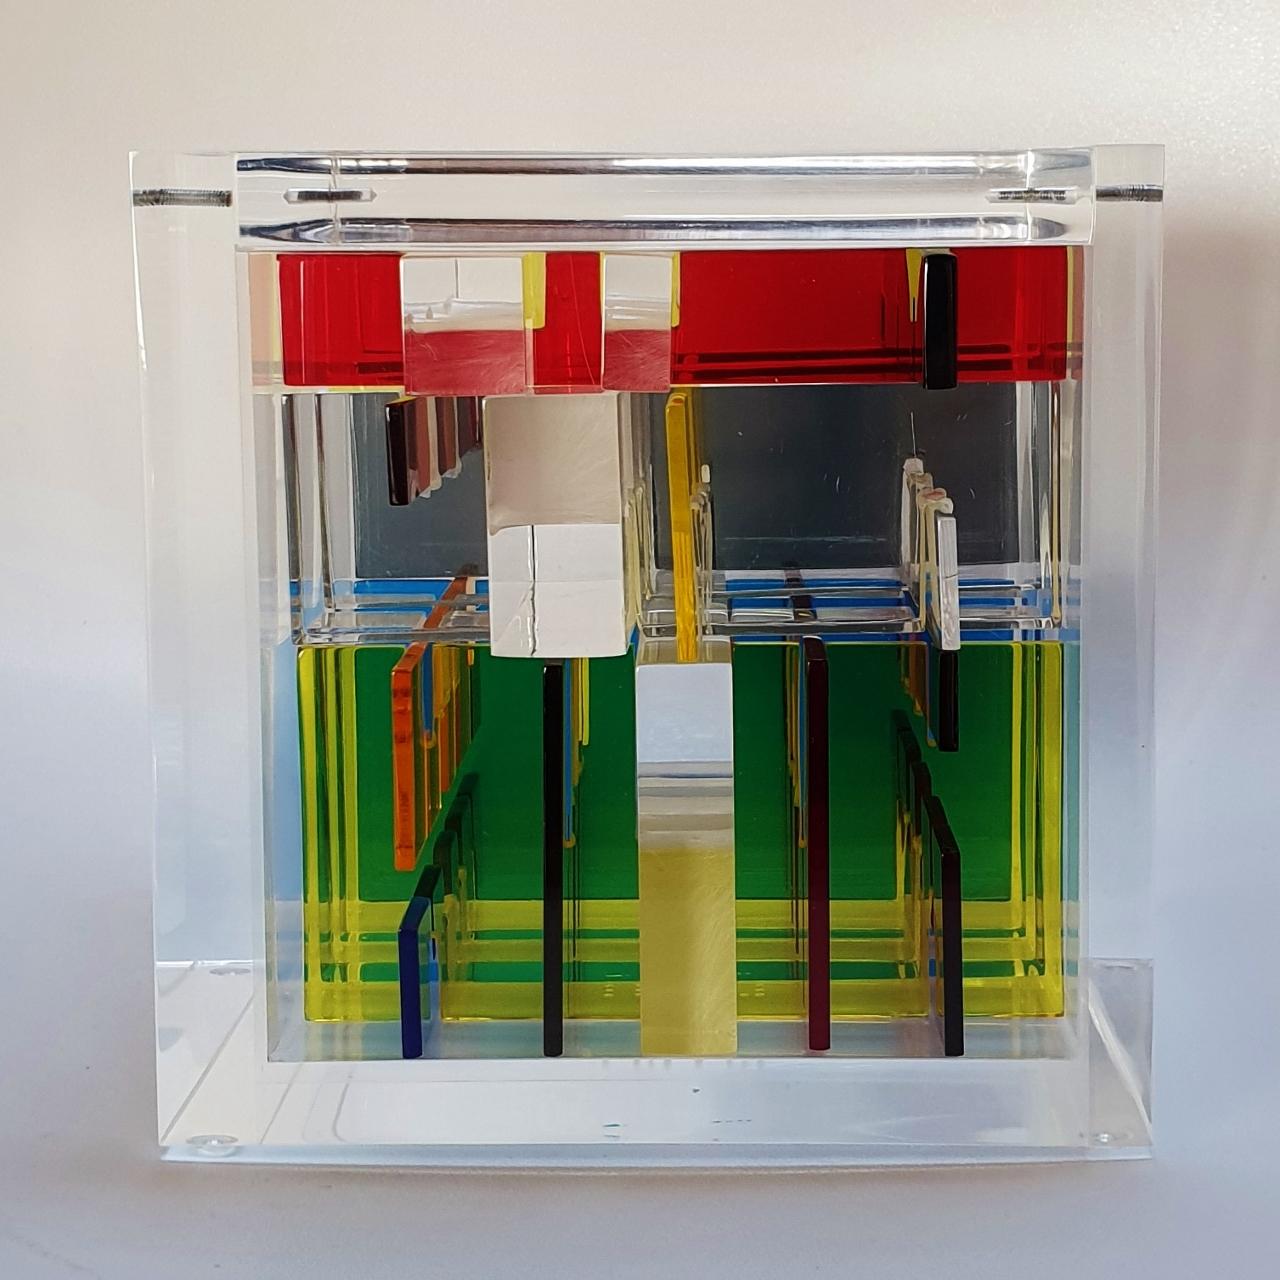 Homage to Mondriaan is a unique small size contemporary modern cube sculpture by the famous Dutch artist couple Nel Haringa and Fred Olijve. The cube sculpture consists of a few dozen hand cut hand polished plexiglass elements carefully stacked